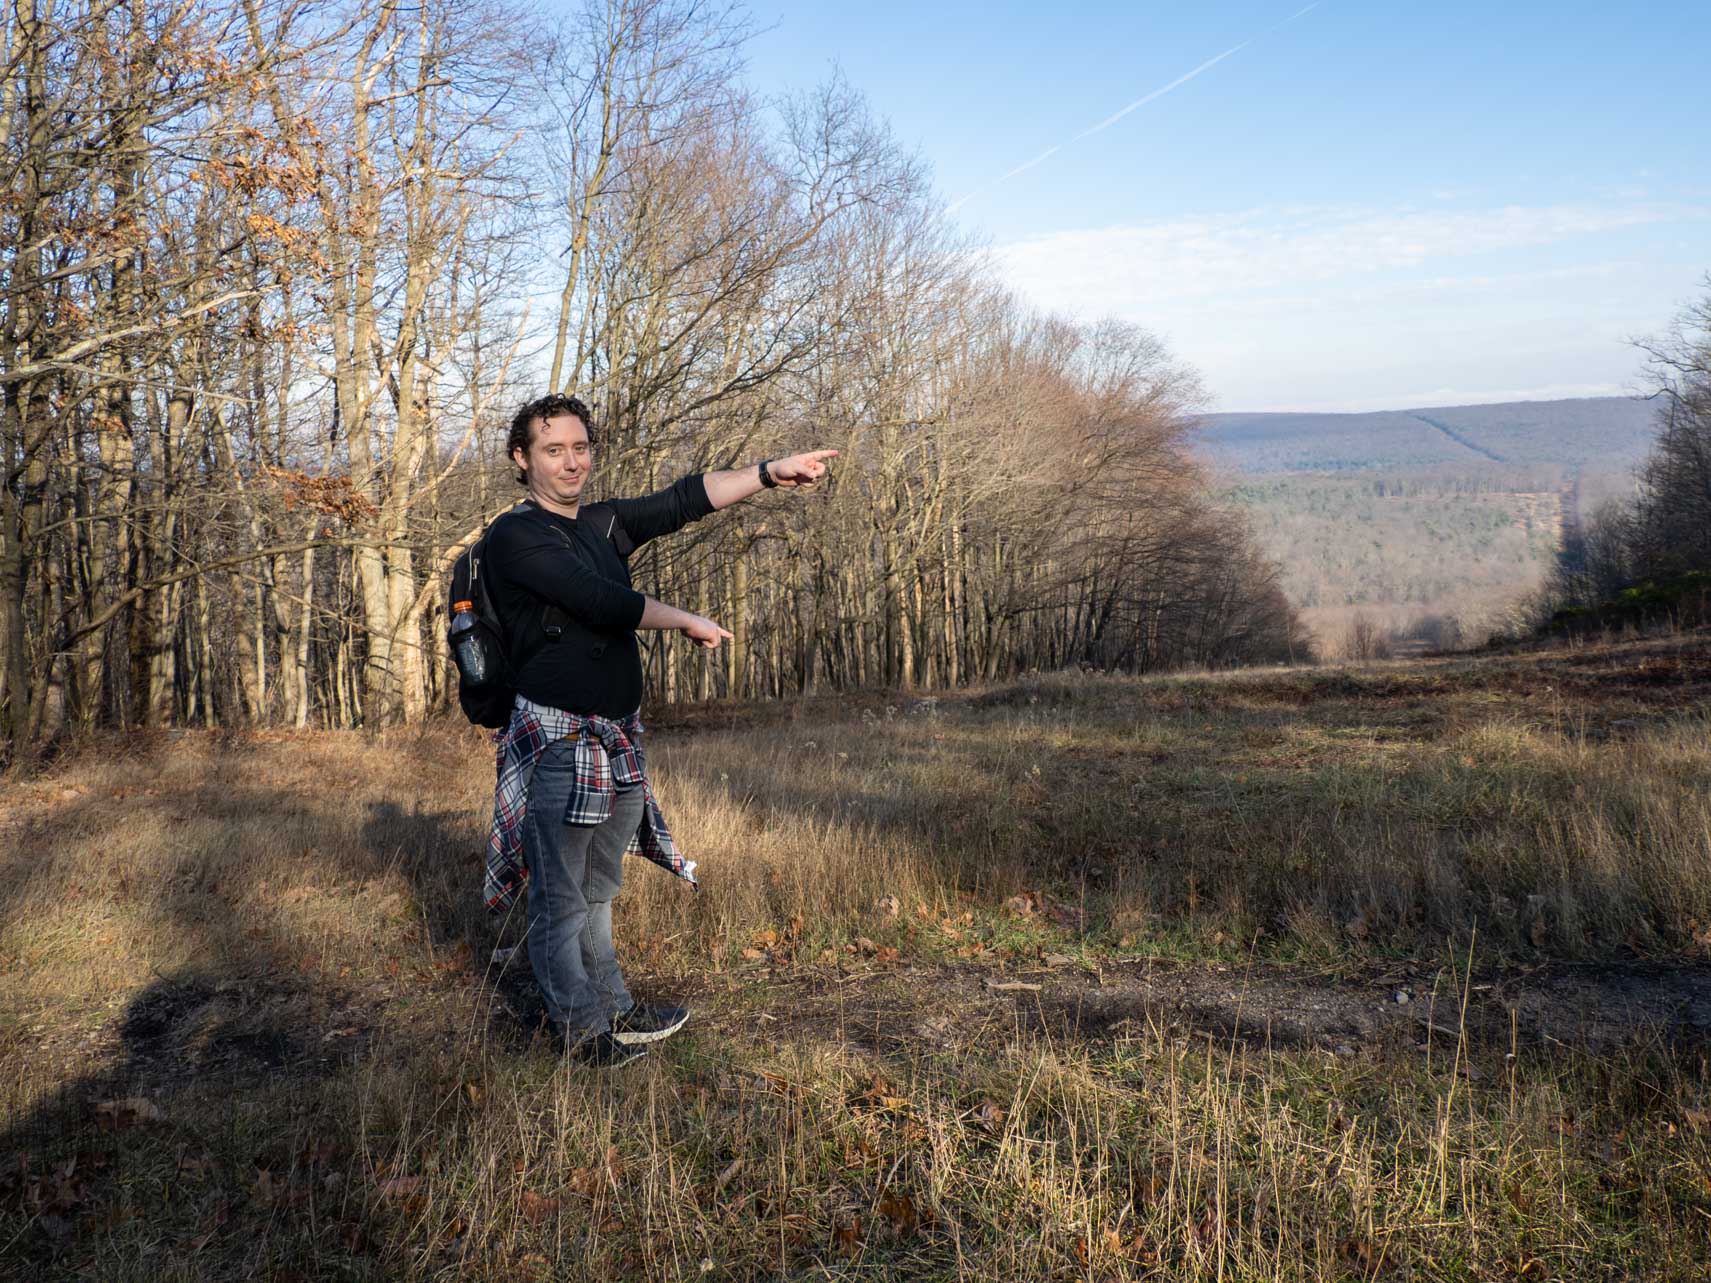 Andrew points at a clearing formed when part of the forest was felled for power lines.